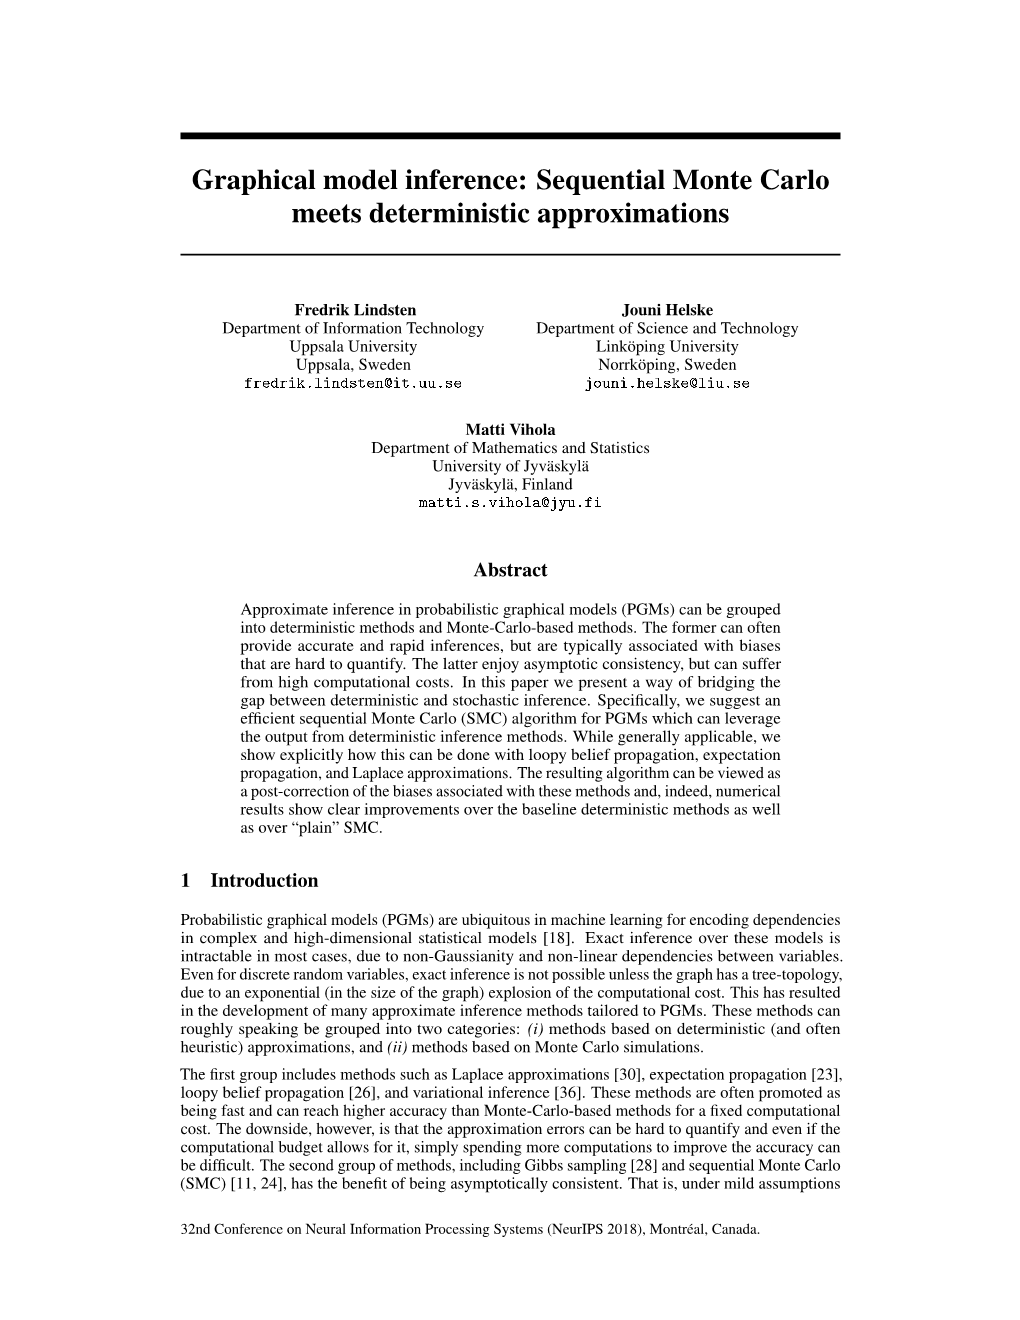 Graphical Model Inference: Sequential Monte Carlo Meets Deterministic Approximations